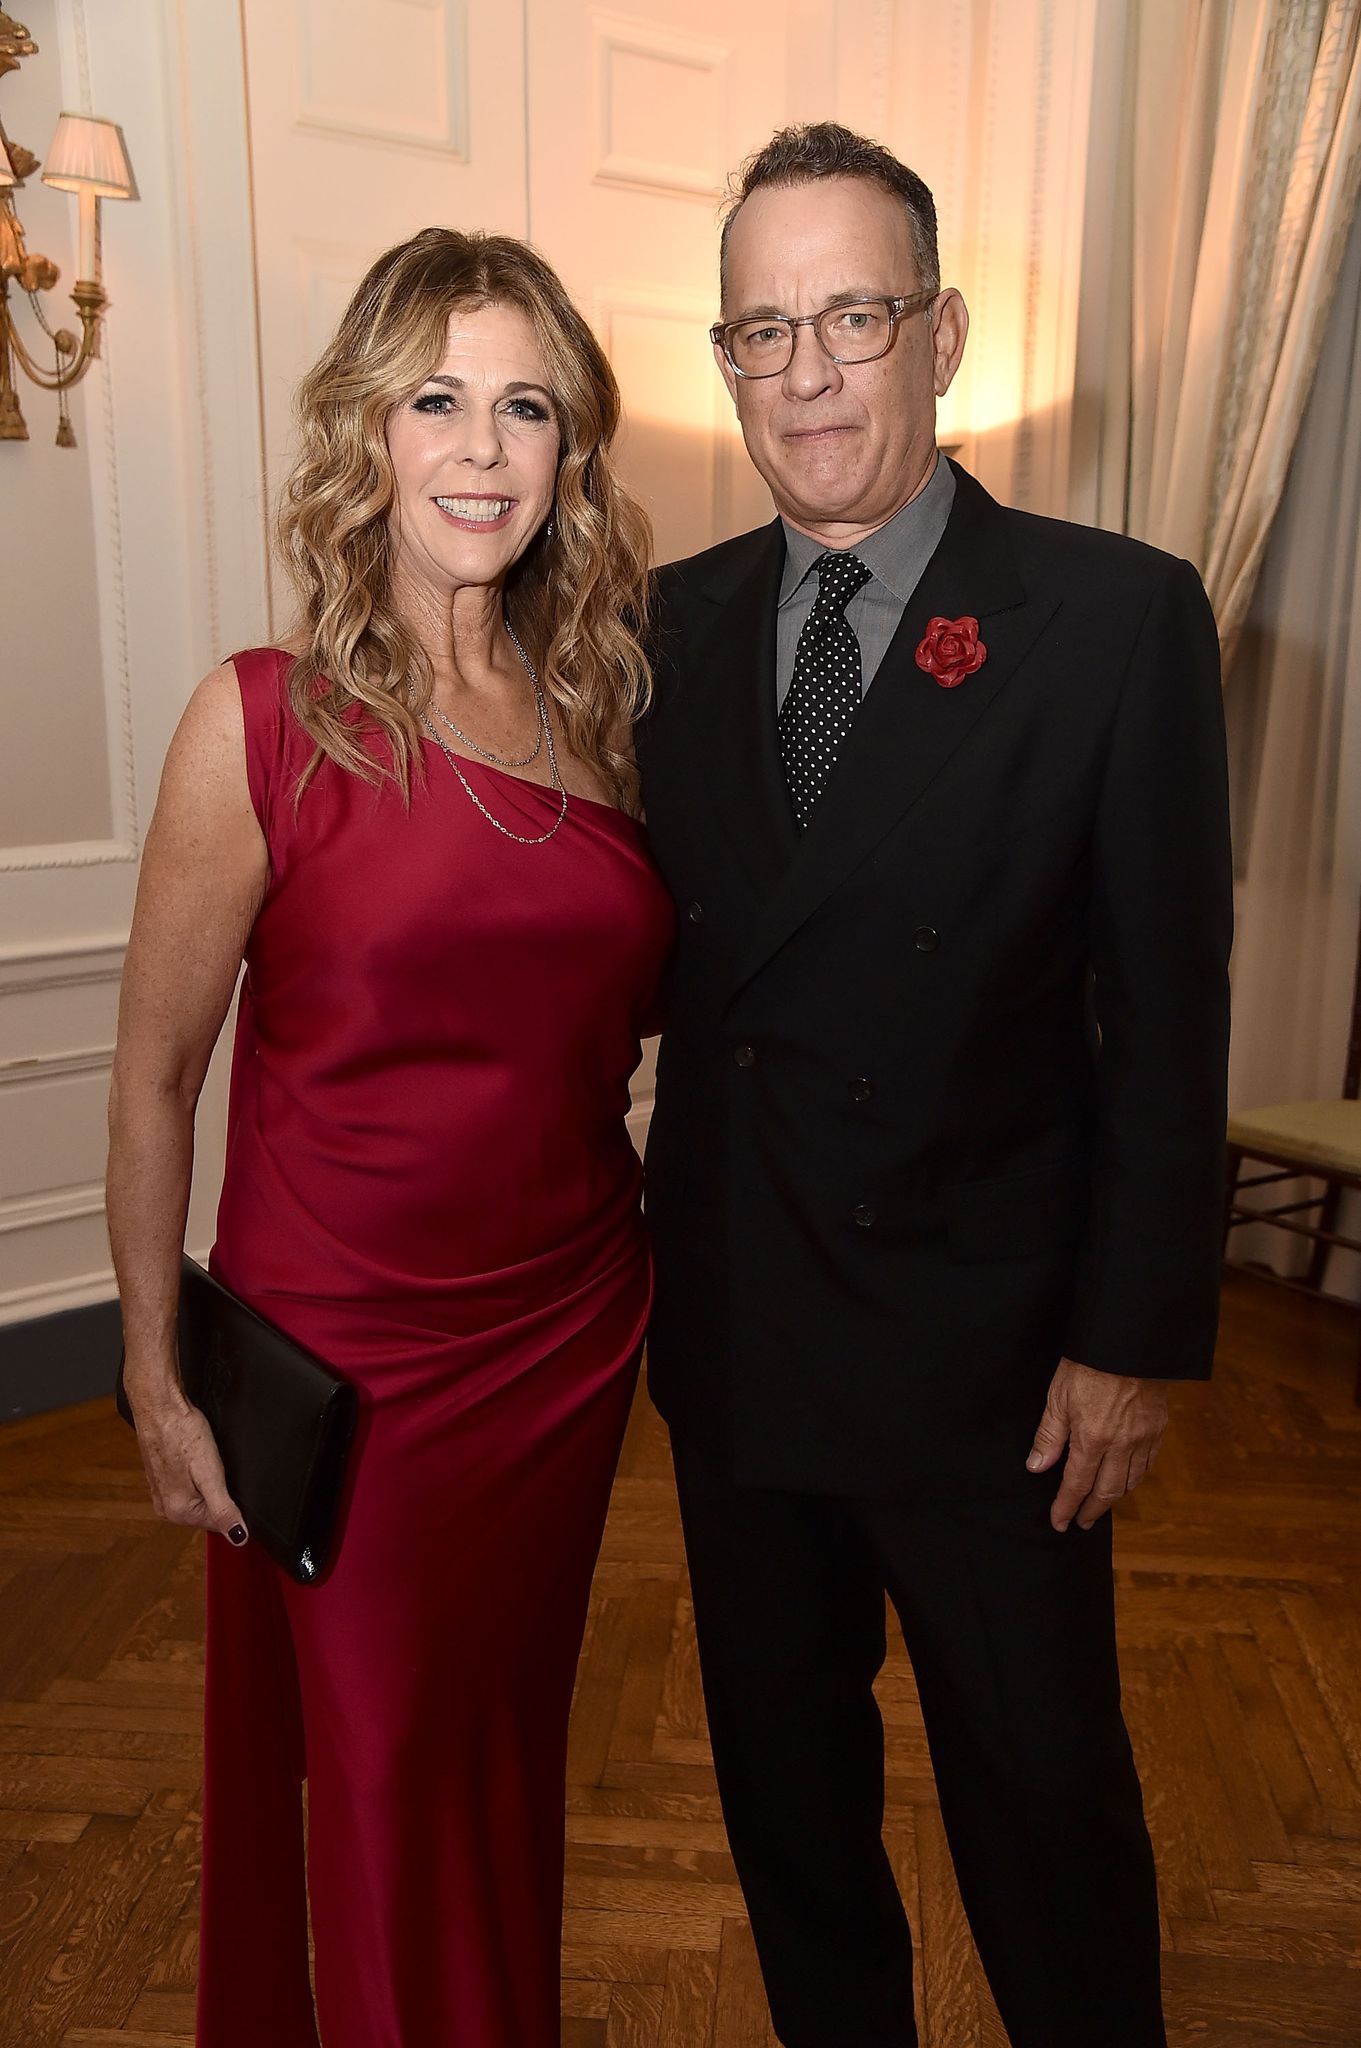 Rita Wilson and Tom Hanks attend the 2018 American Friends of Blerancourt Dinner at Colony Club on November 9, 2018 | Photo: Getty Images